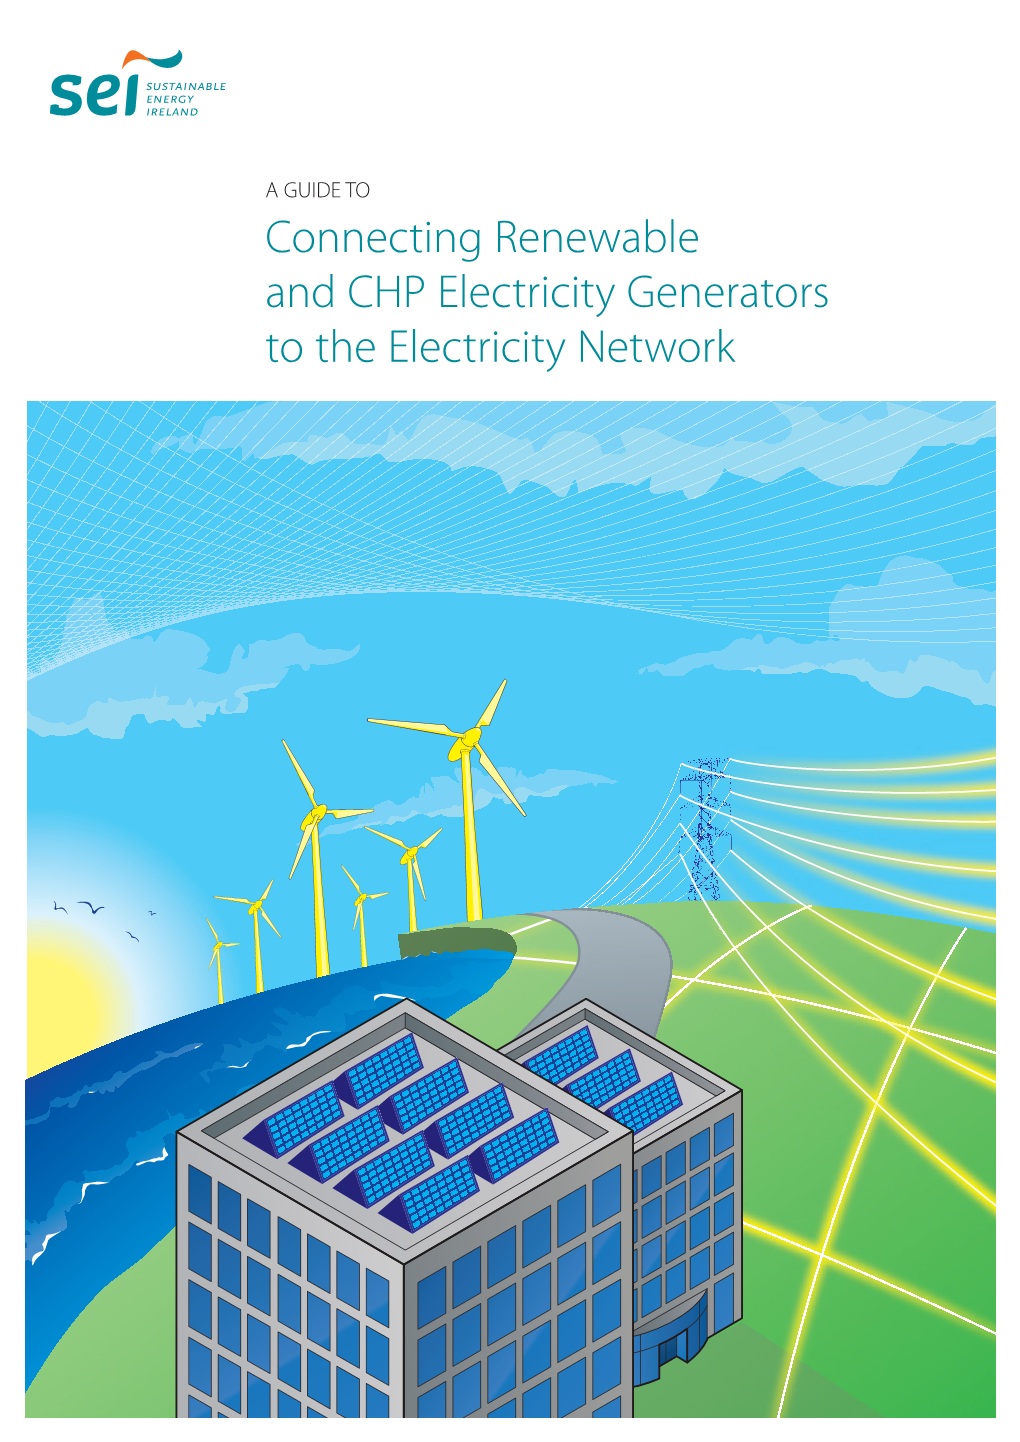 Connecting Renewable and CHP Electricity Generators to the Electricity Network